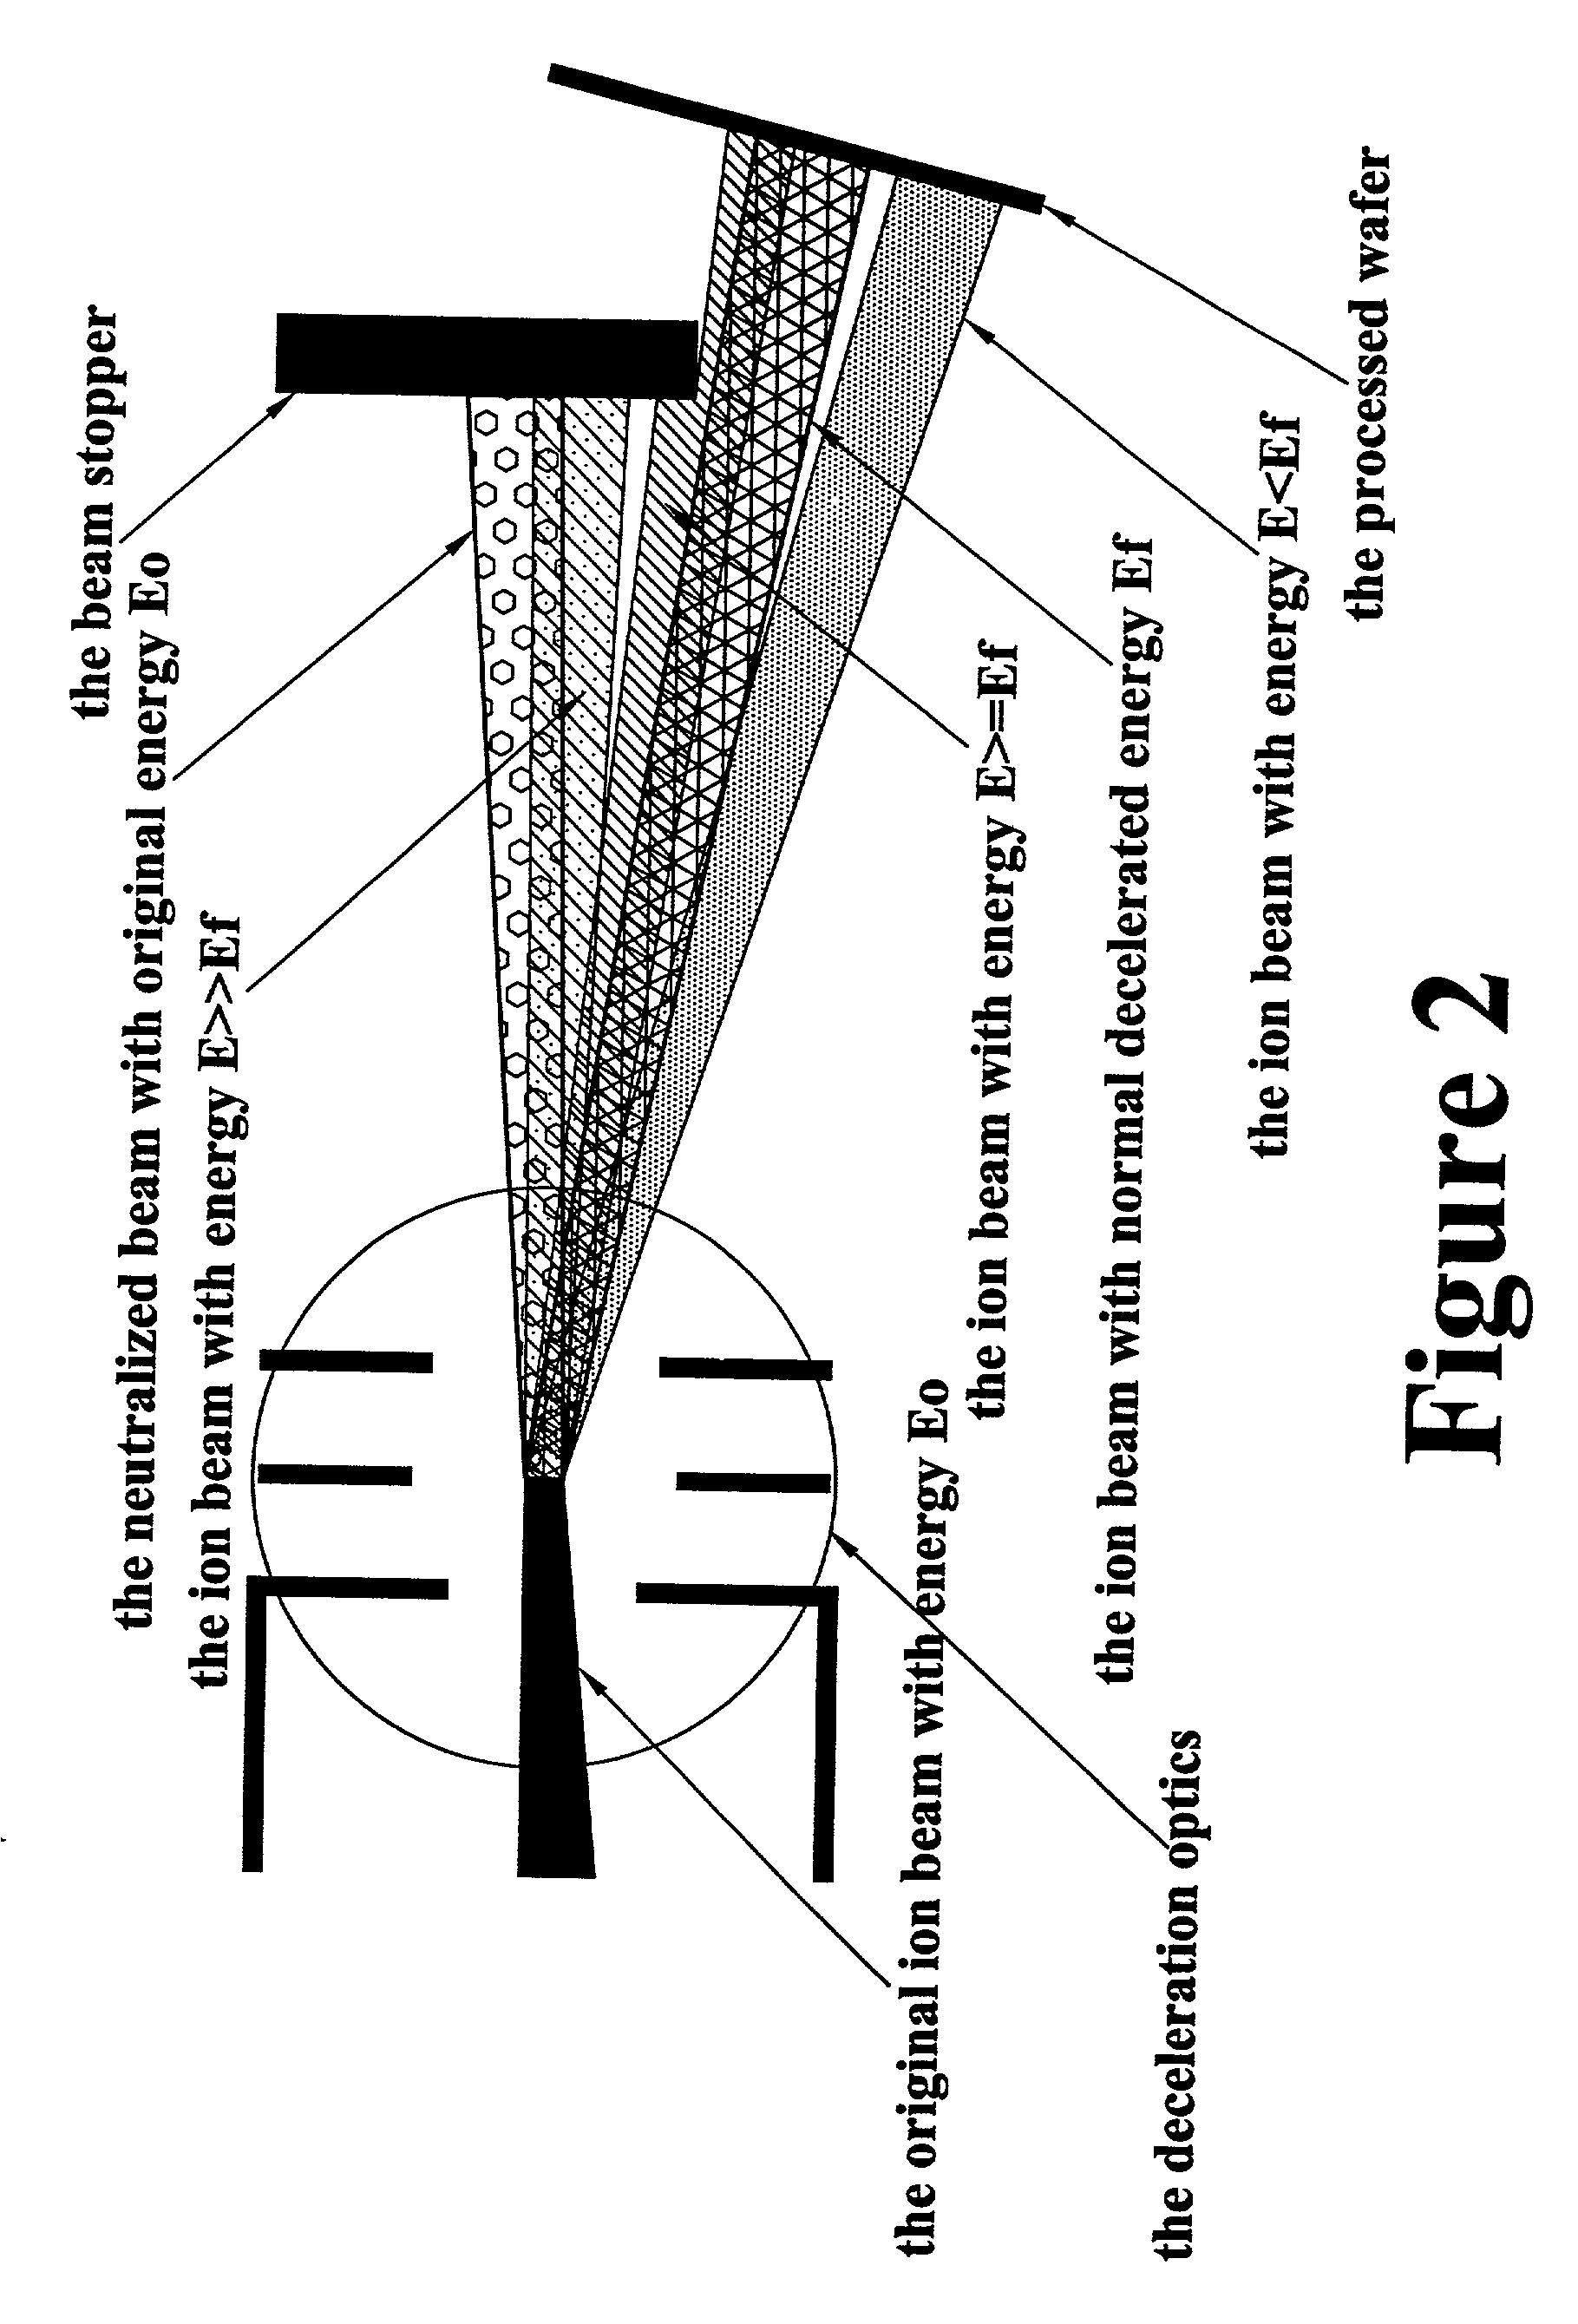 Apparatus for decelerating ion beams for reducing the energy contamination